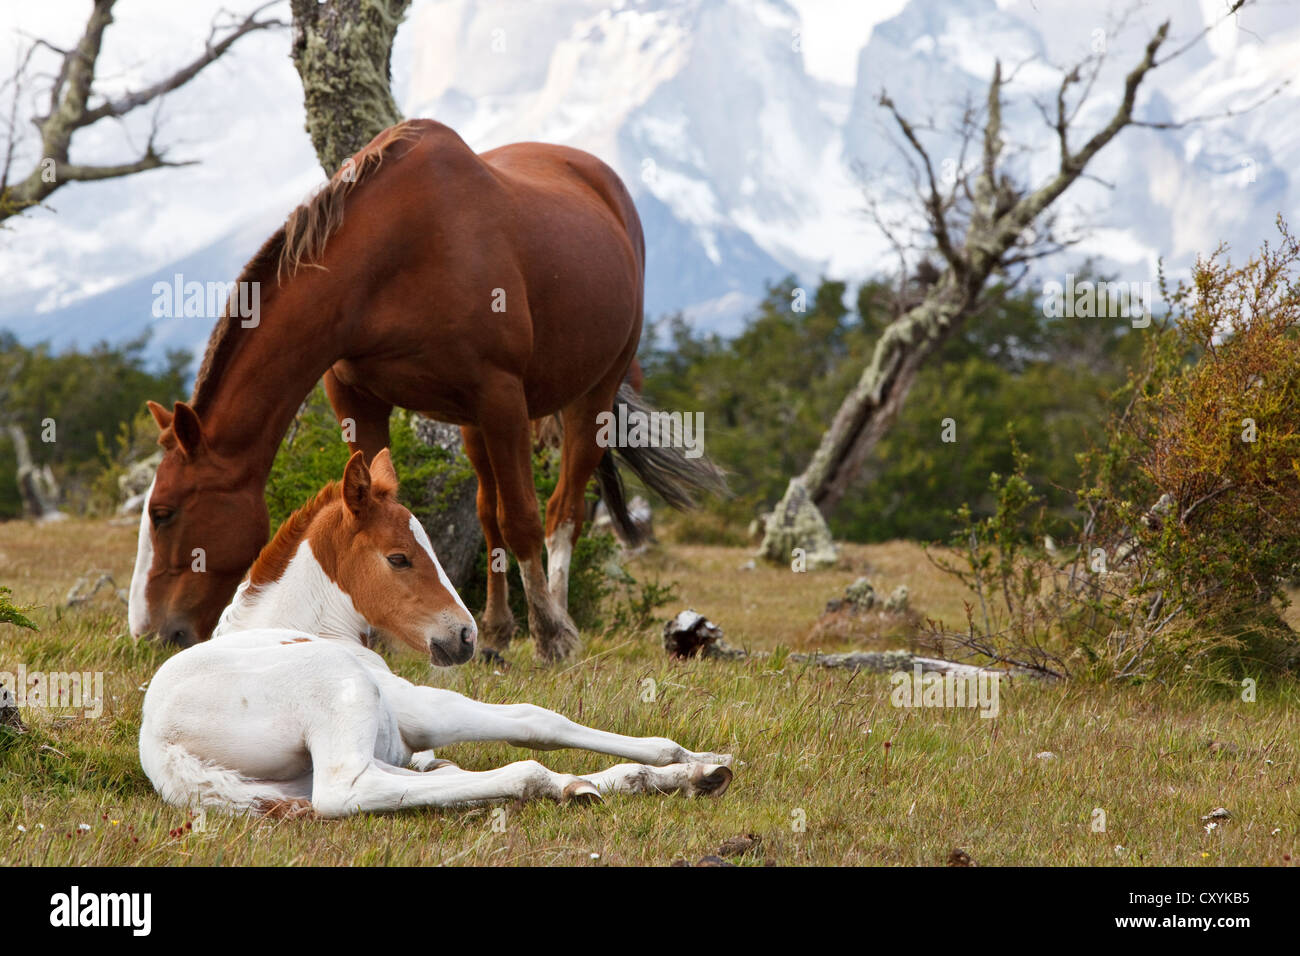 A mare and a foal on a green meadow in front of the Cuernos del Paine granite mountains, Torres del Paine National Park, Stock Photo